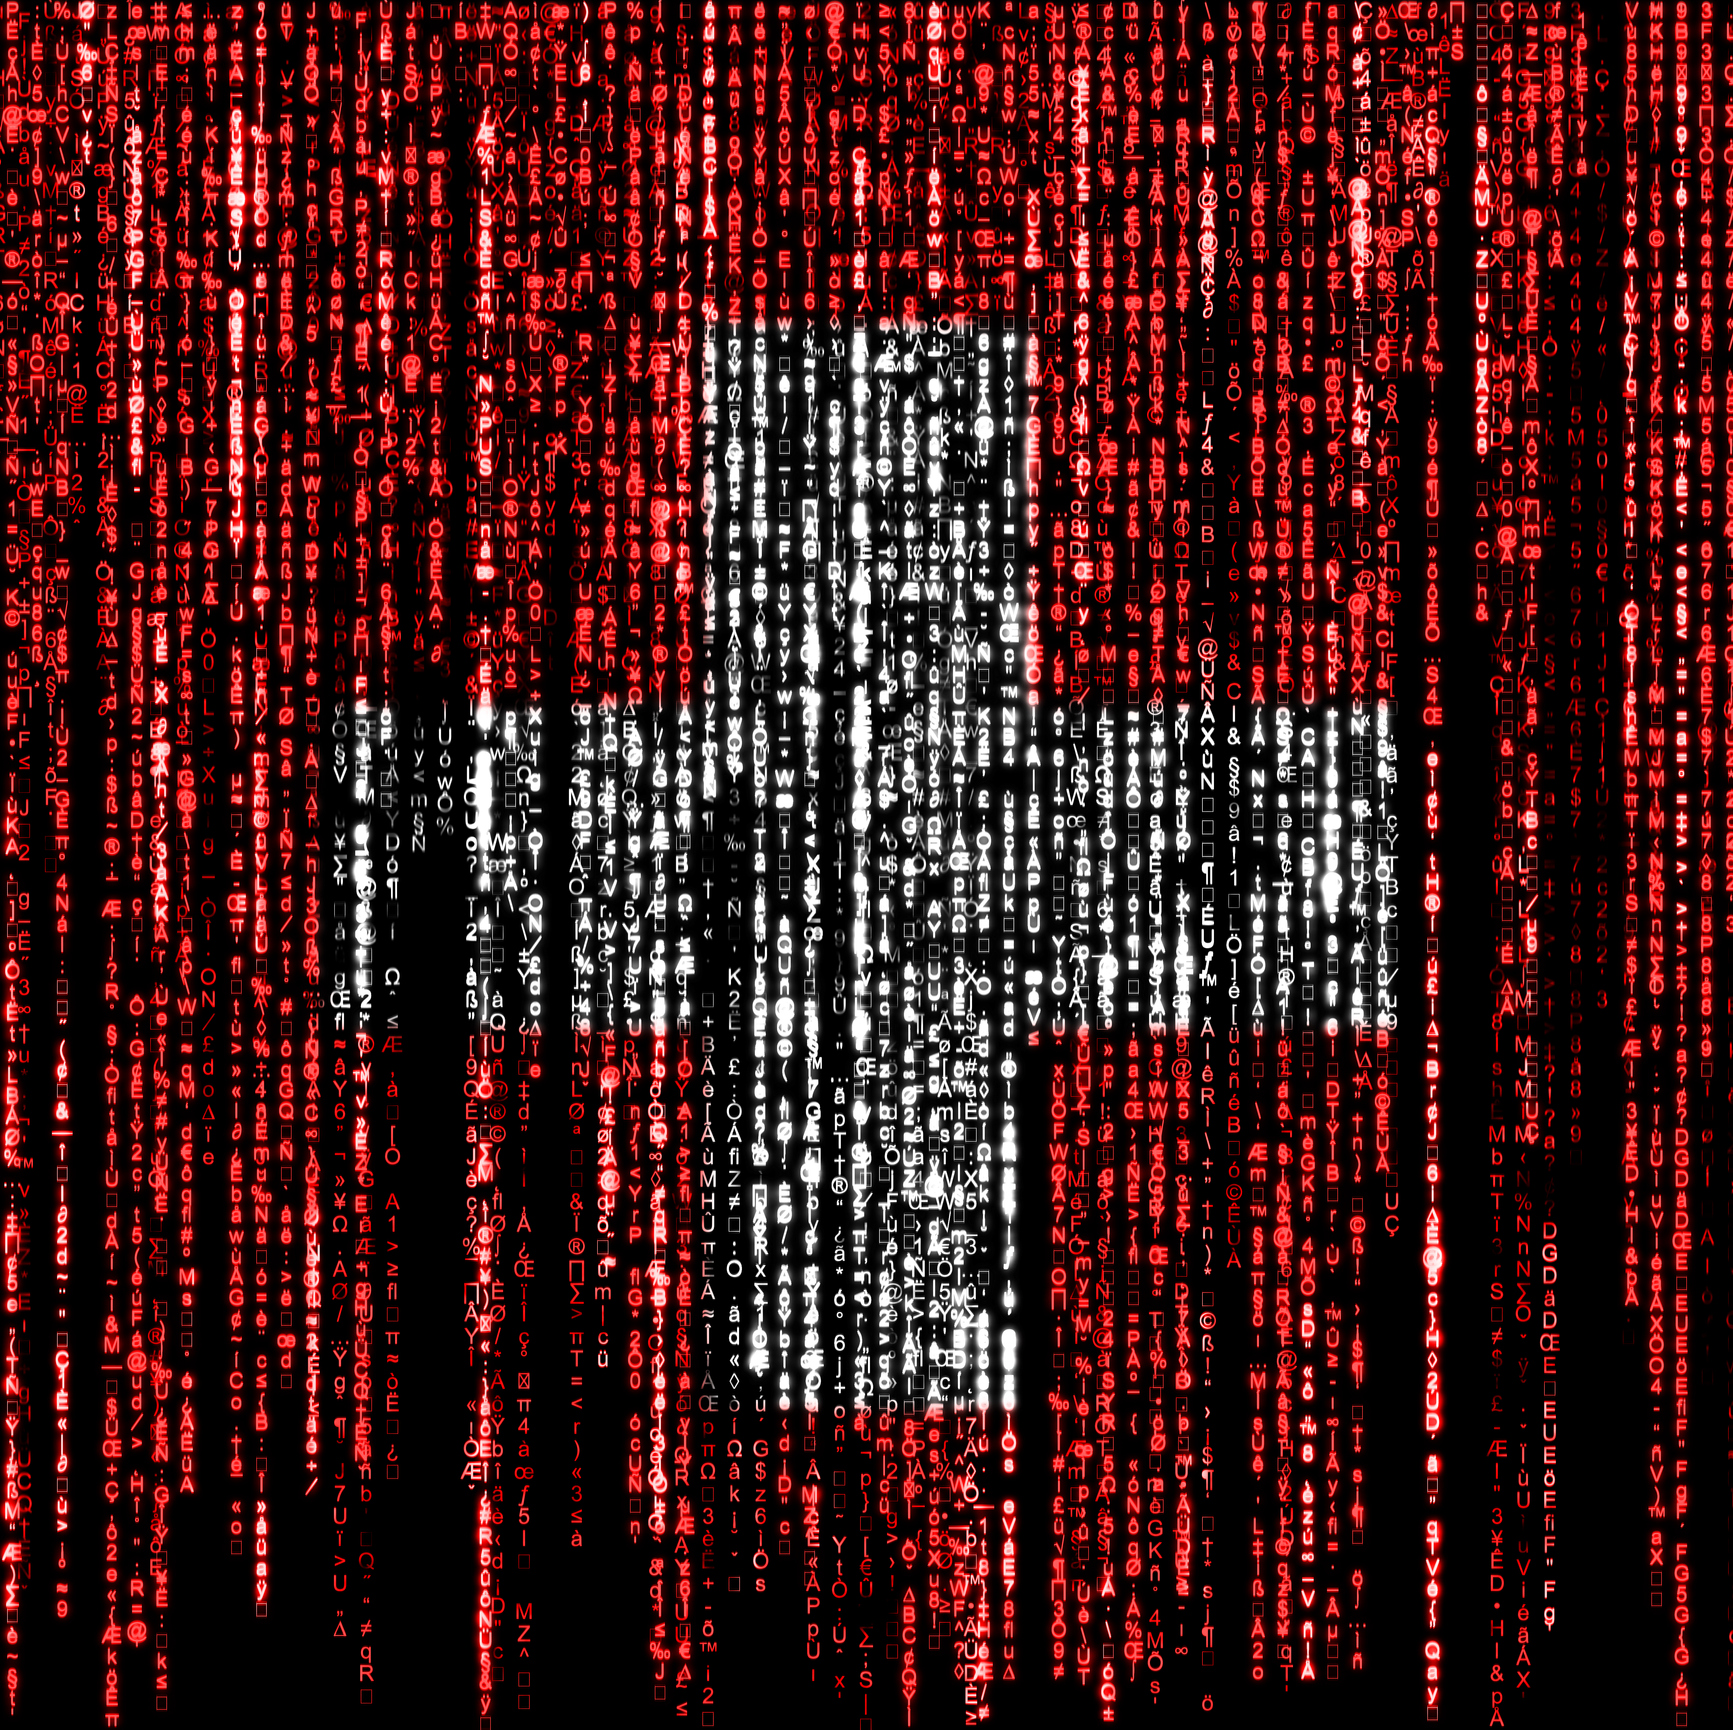 Swiss police, army, and customs affected by cyber attack